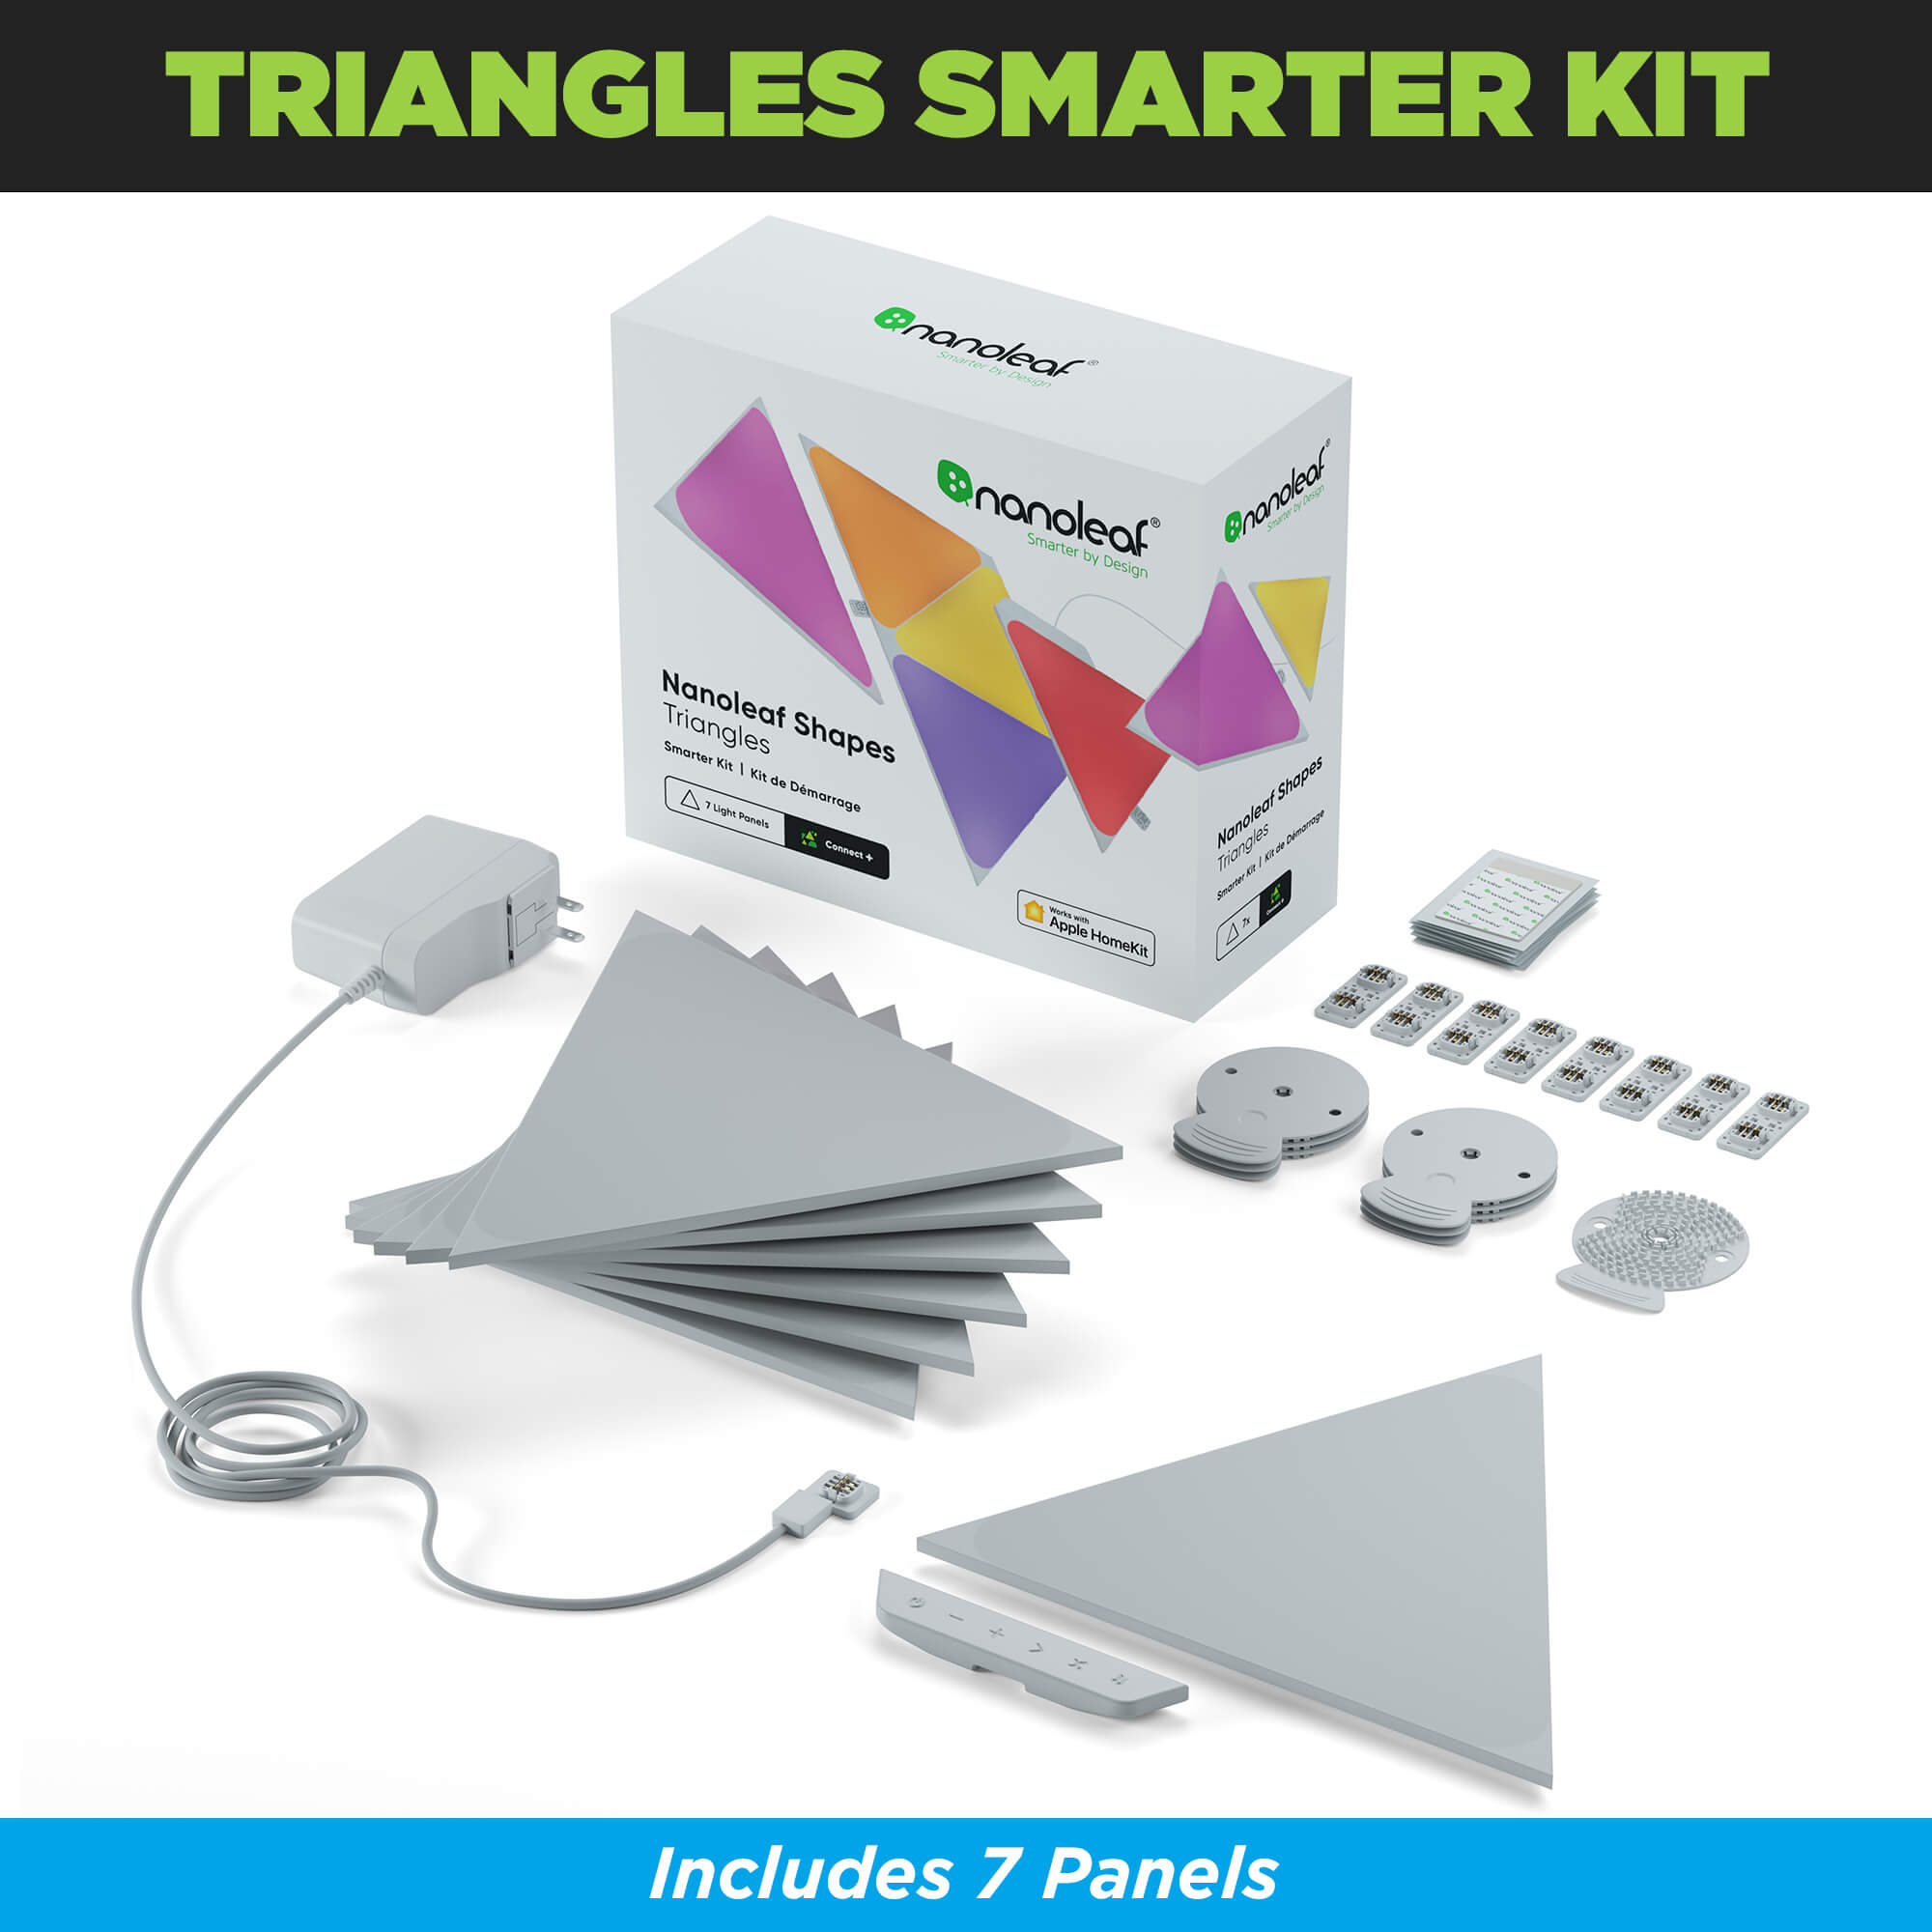 Triangles Smarter Kit from Nanoleaf comes with 7 panels.